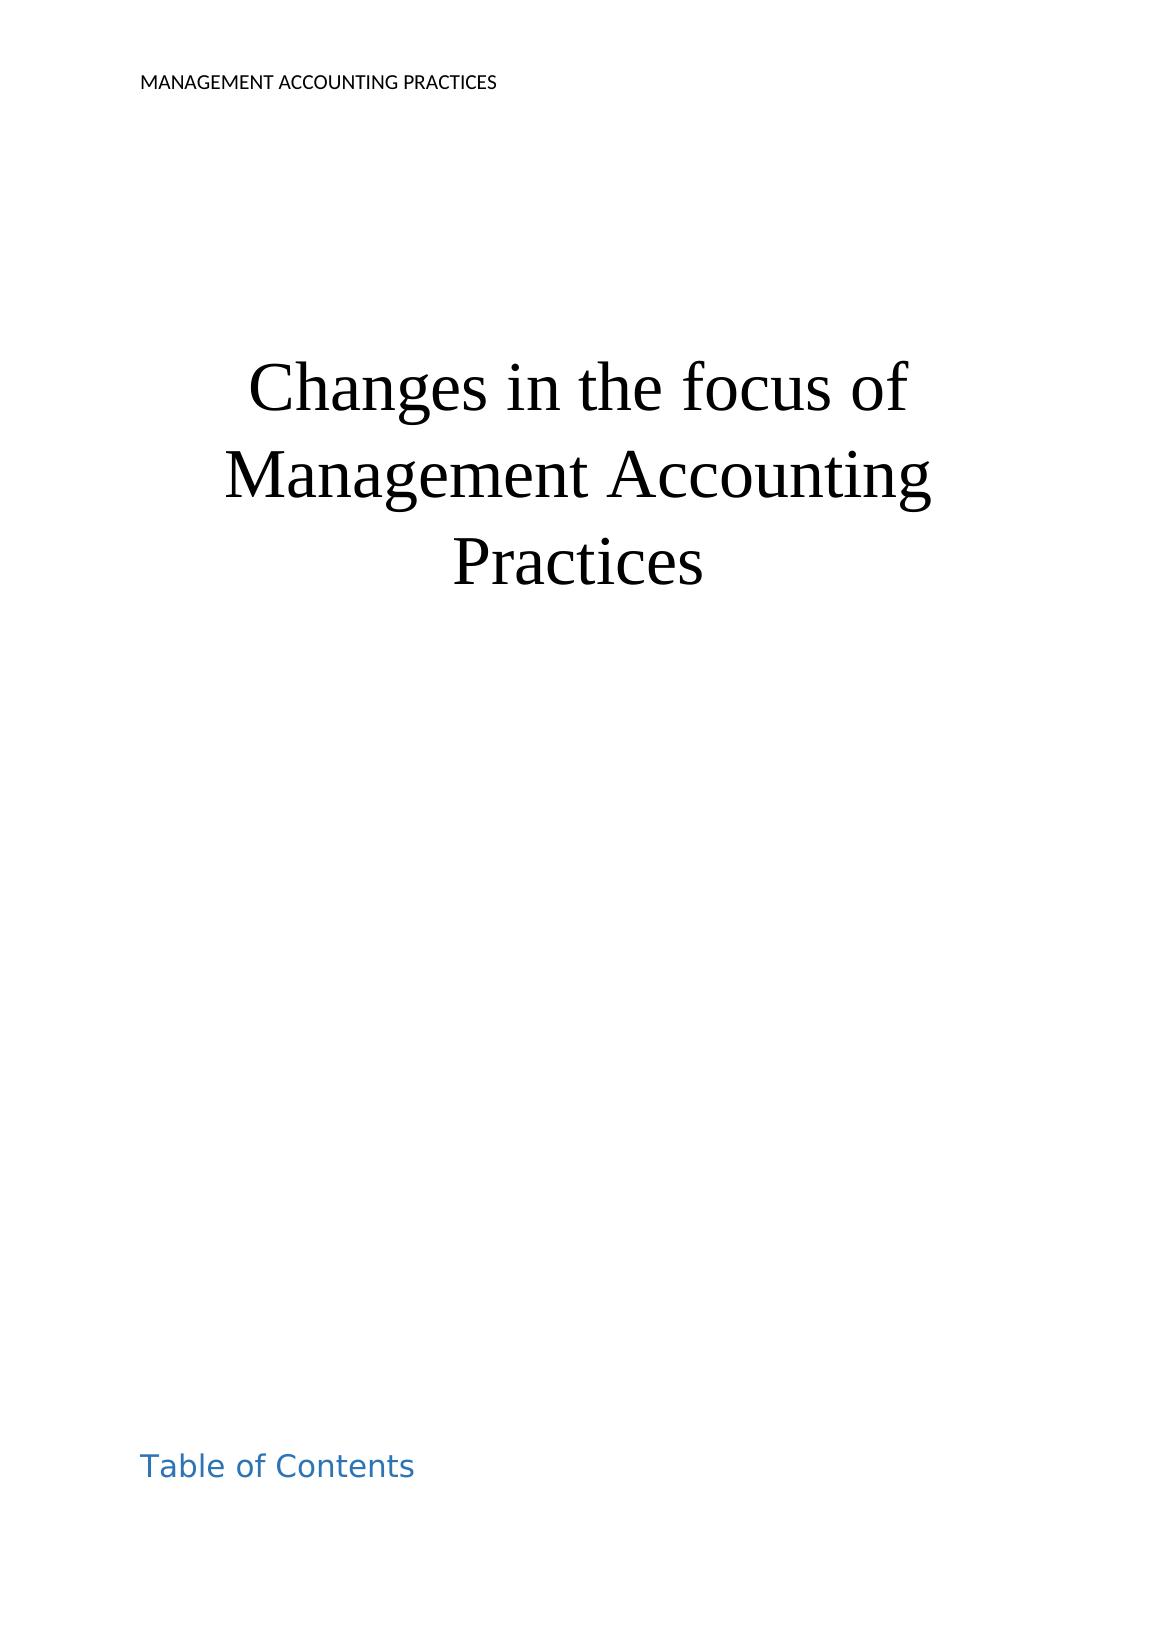 MA620 Advanced Management Accounting Practices | Assignment_1